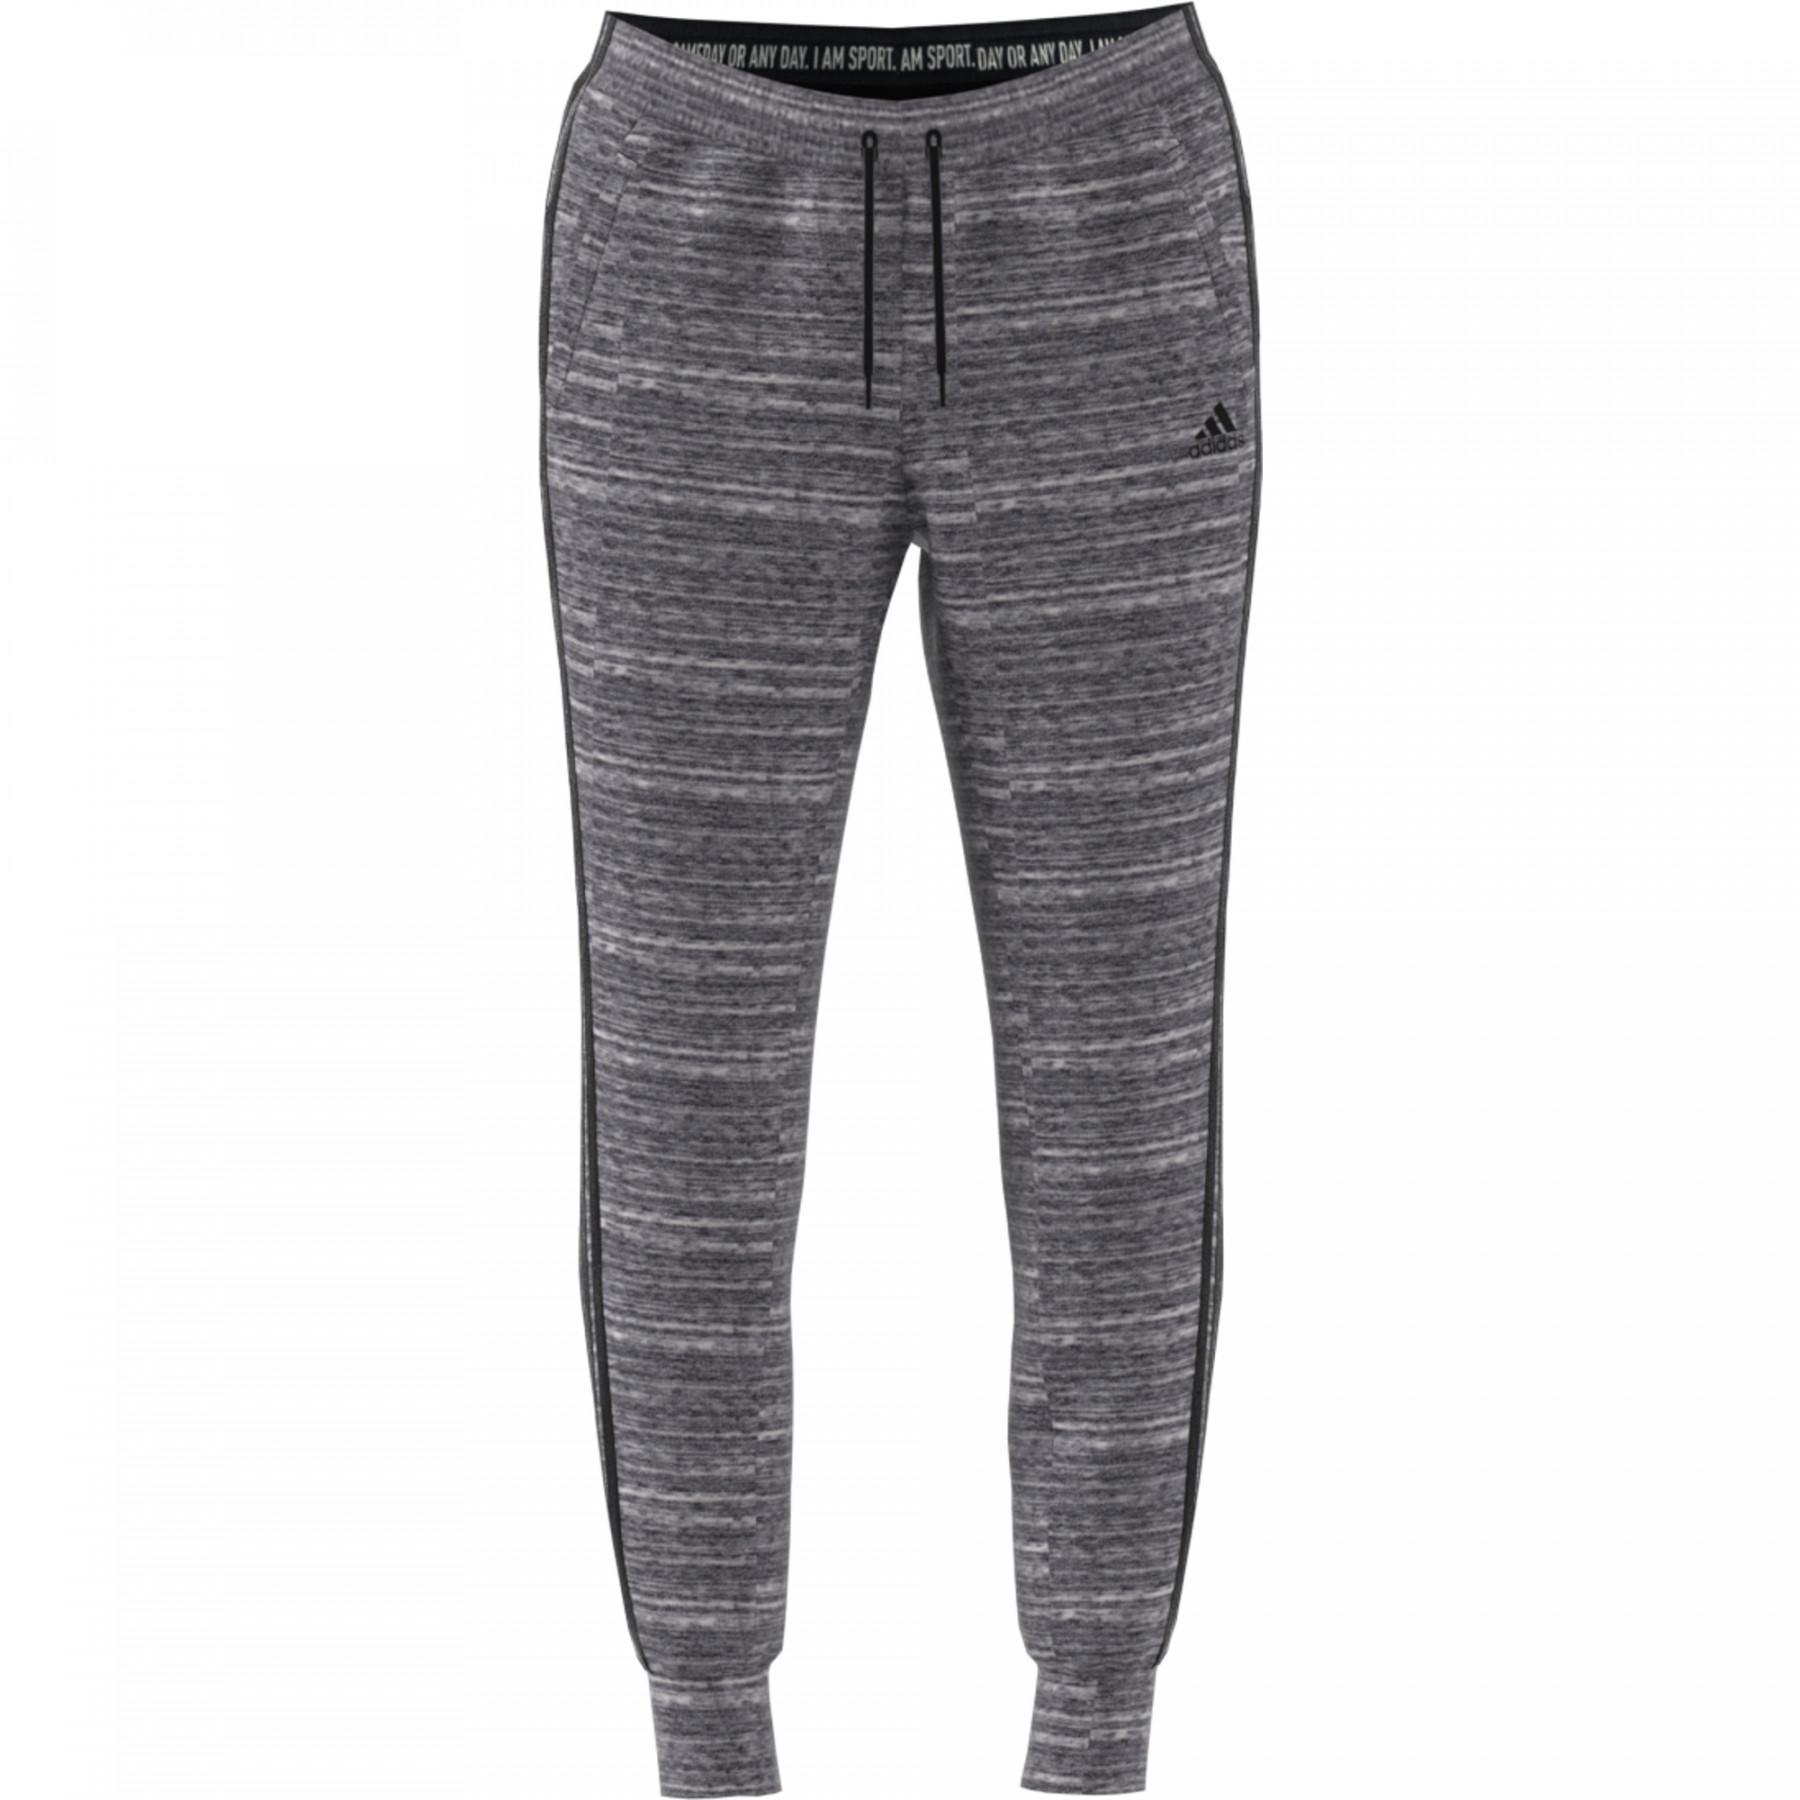 Women's trousers adidas Must Haves Mélange